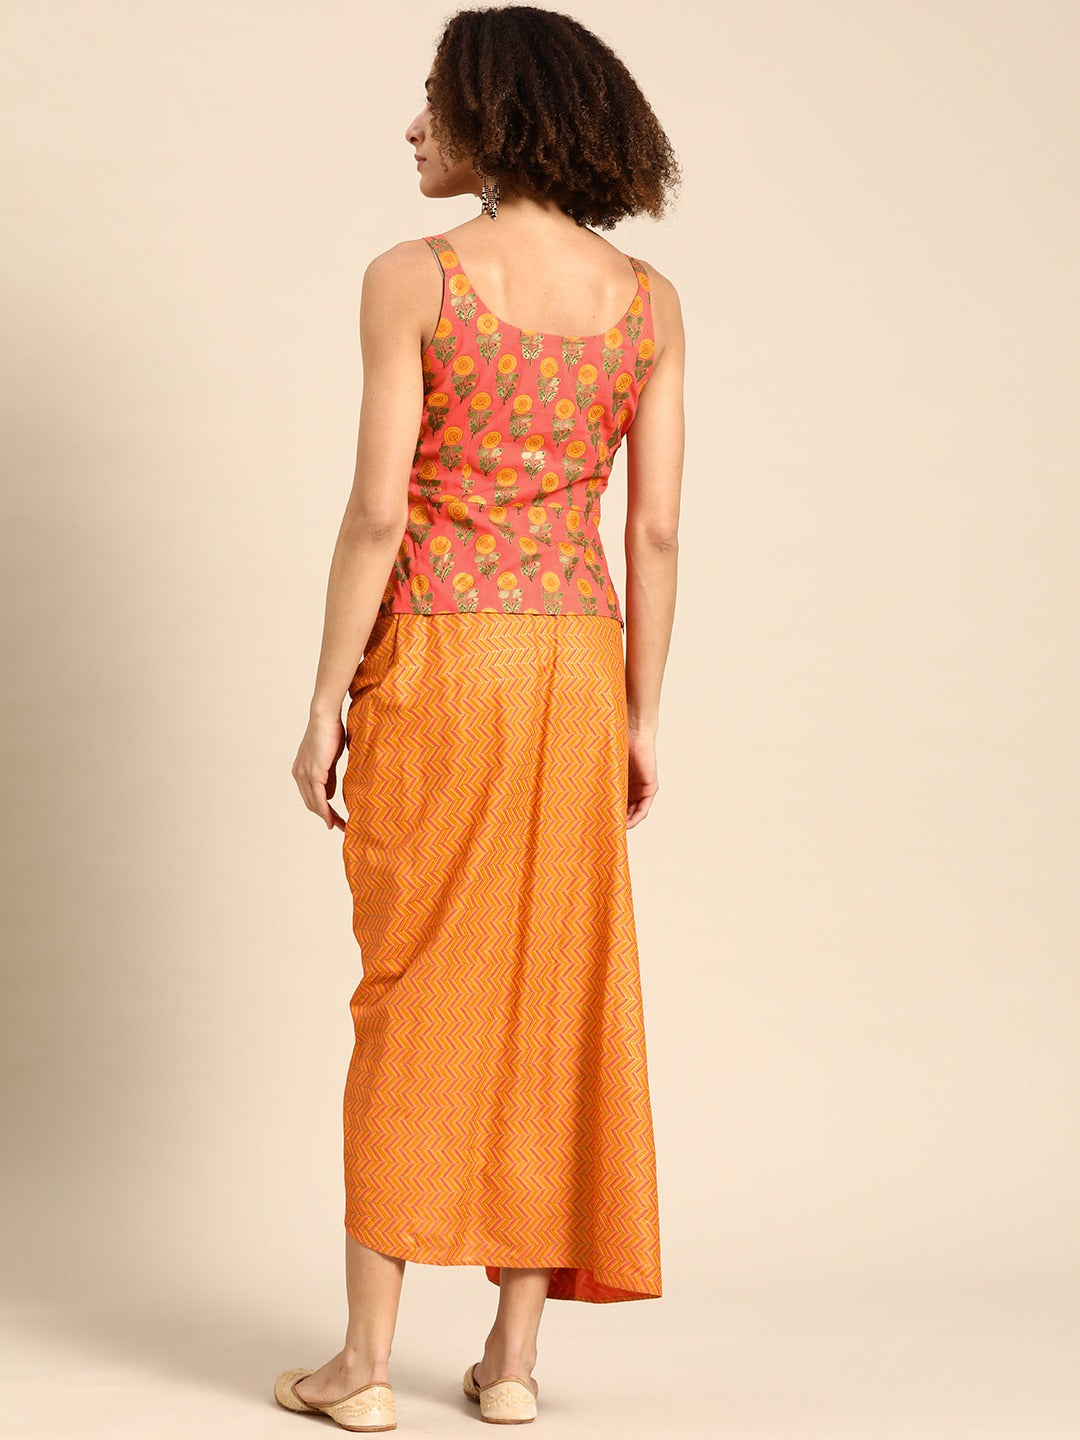 Yin Printed Dhoti Skirt Set Paired With Bralette and Cape - Juhi Bengani -  East Boutique